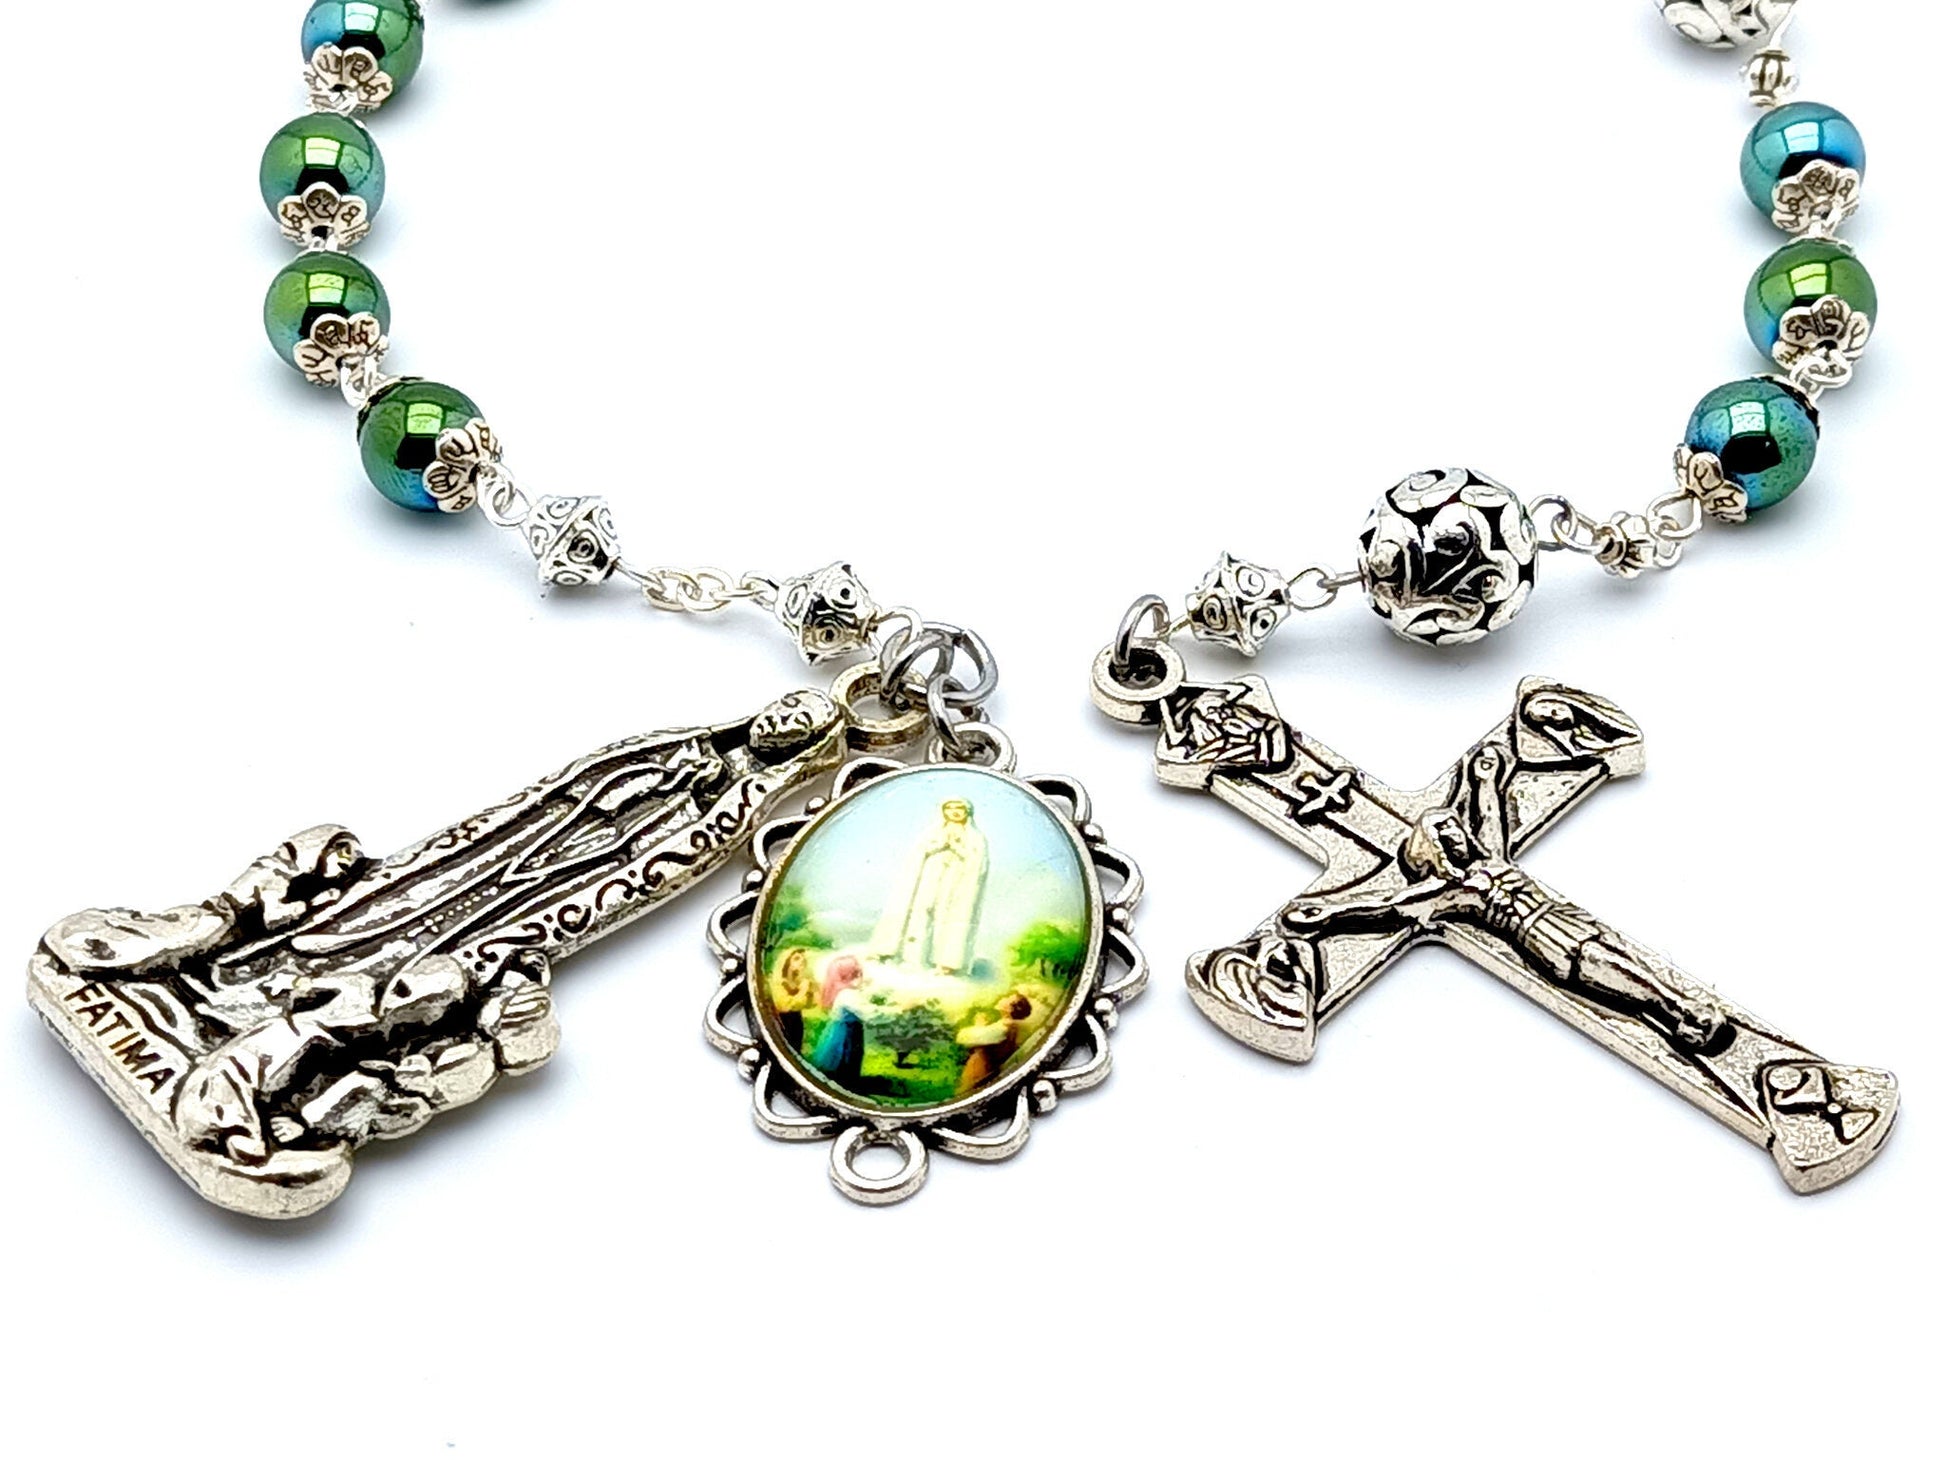 Our Lady of fatima unique rosary beads single decade rosary with green hemitite and silver beads, silver Holy Trinity crucifix and picture end medal.